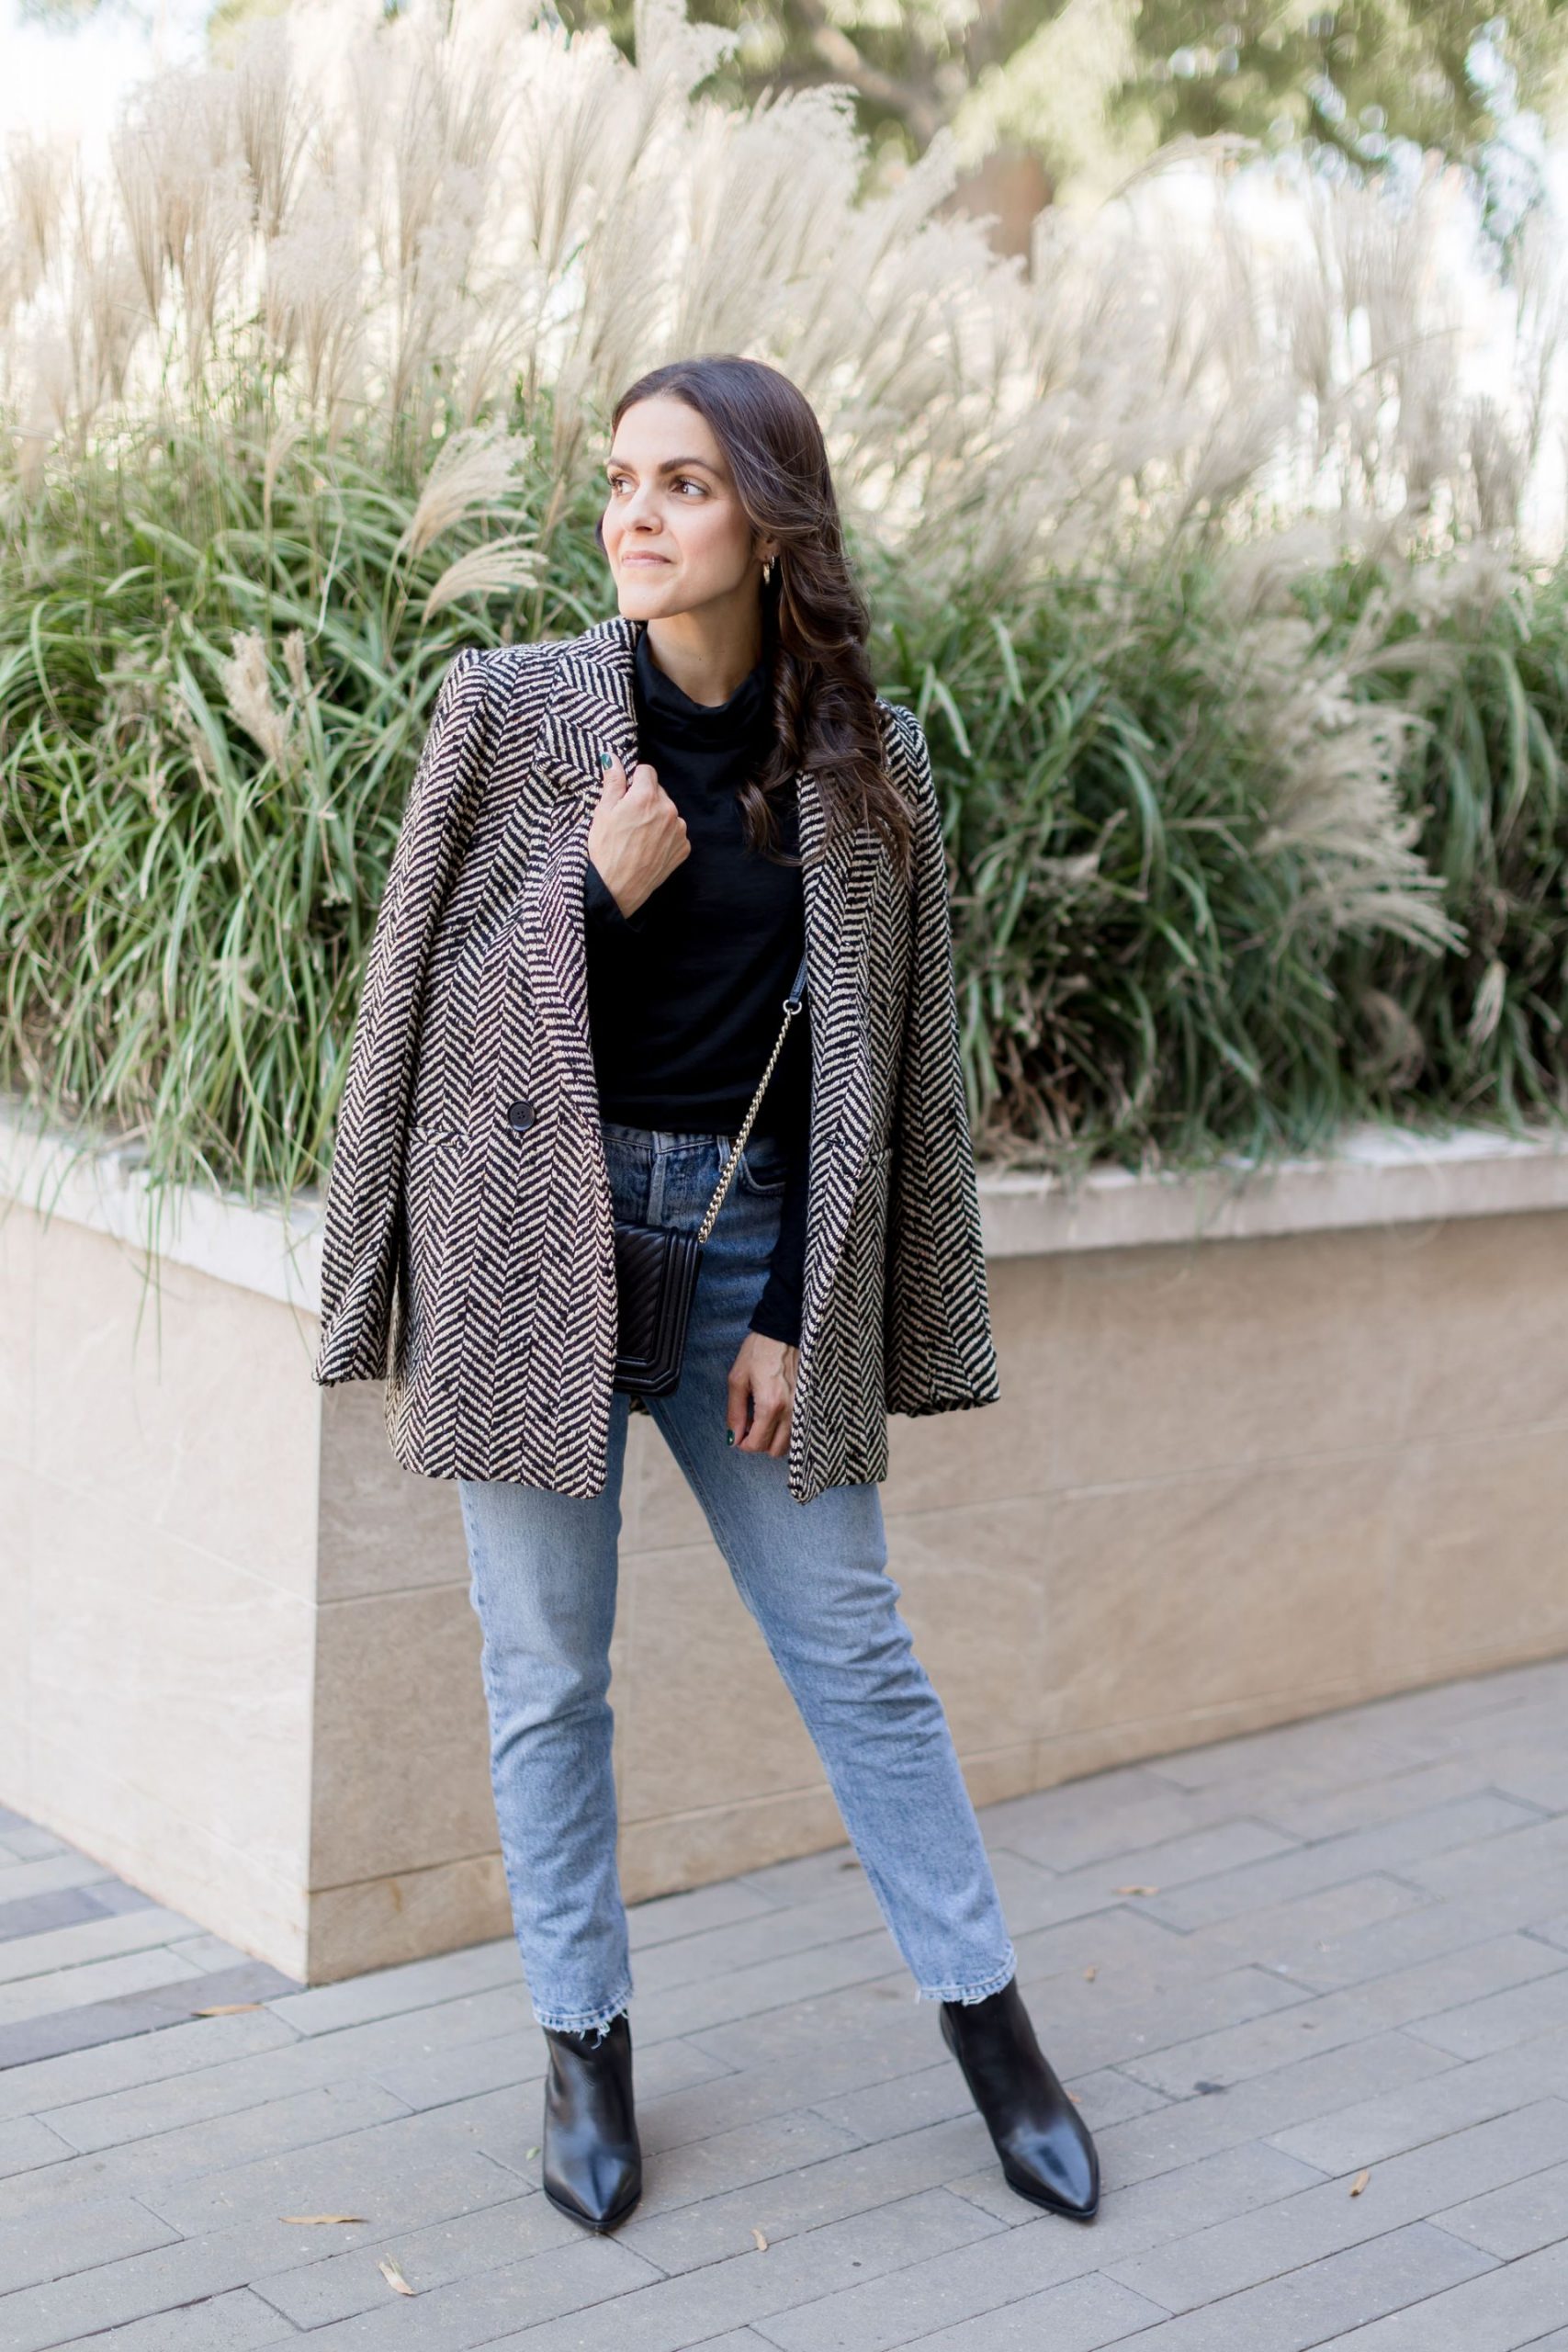 Fall capsule looks: 15 ideas I've bookmarked & worn this season | the ...